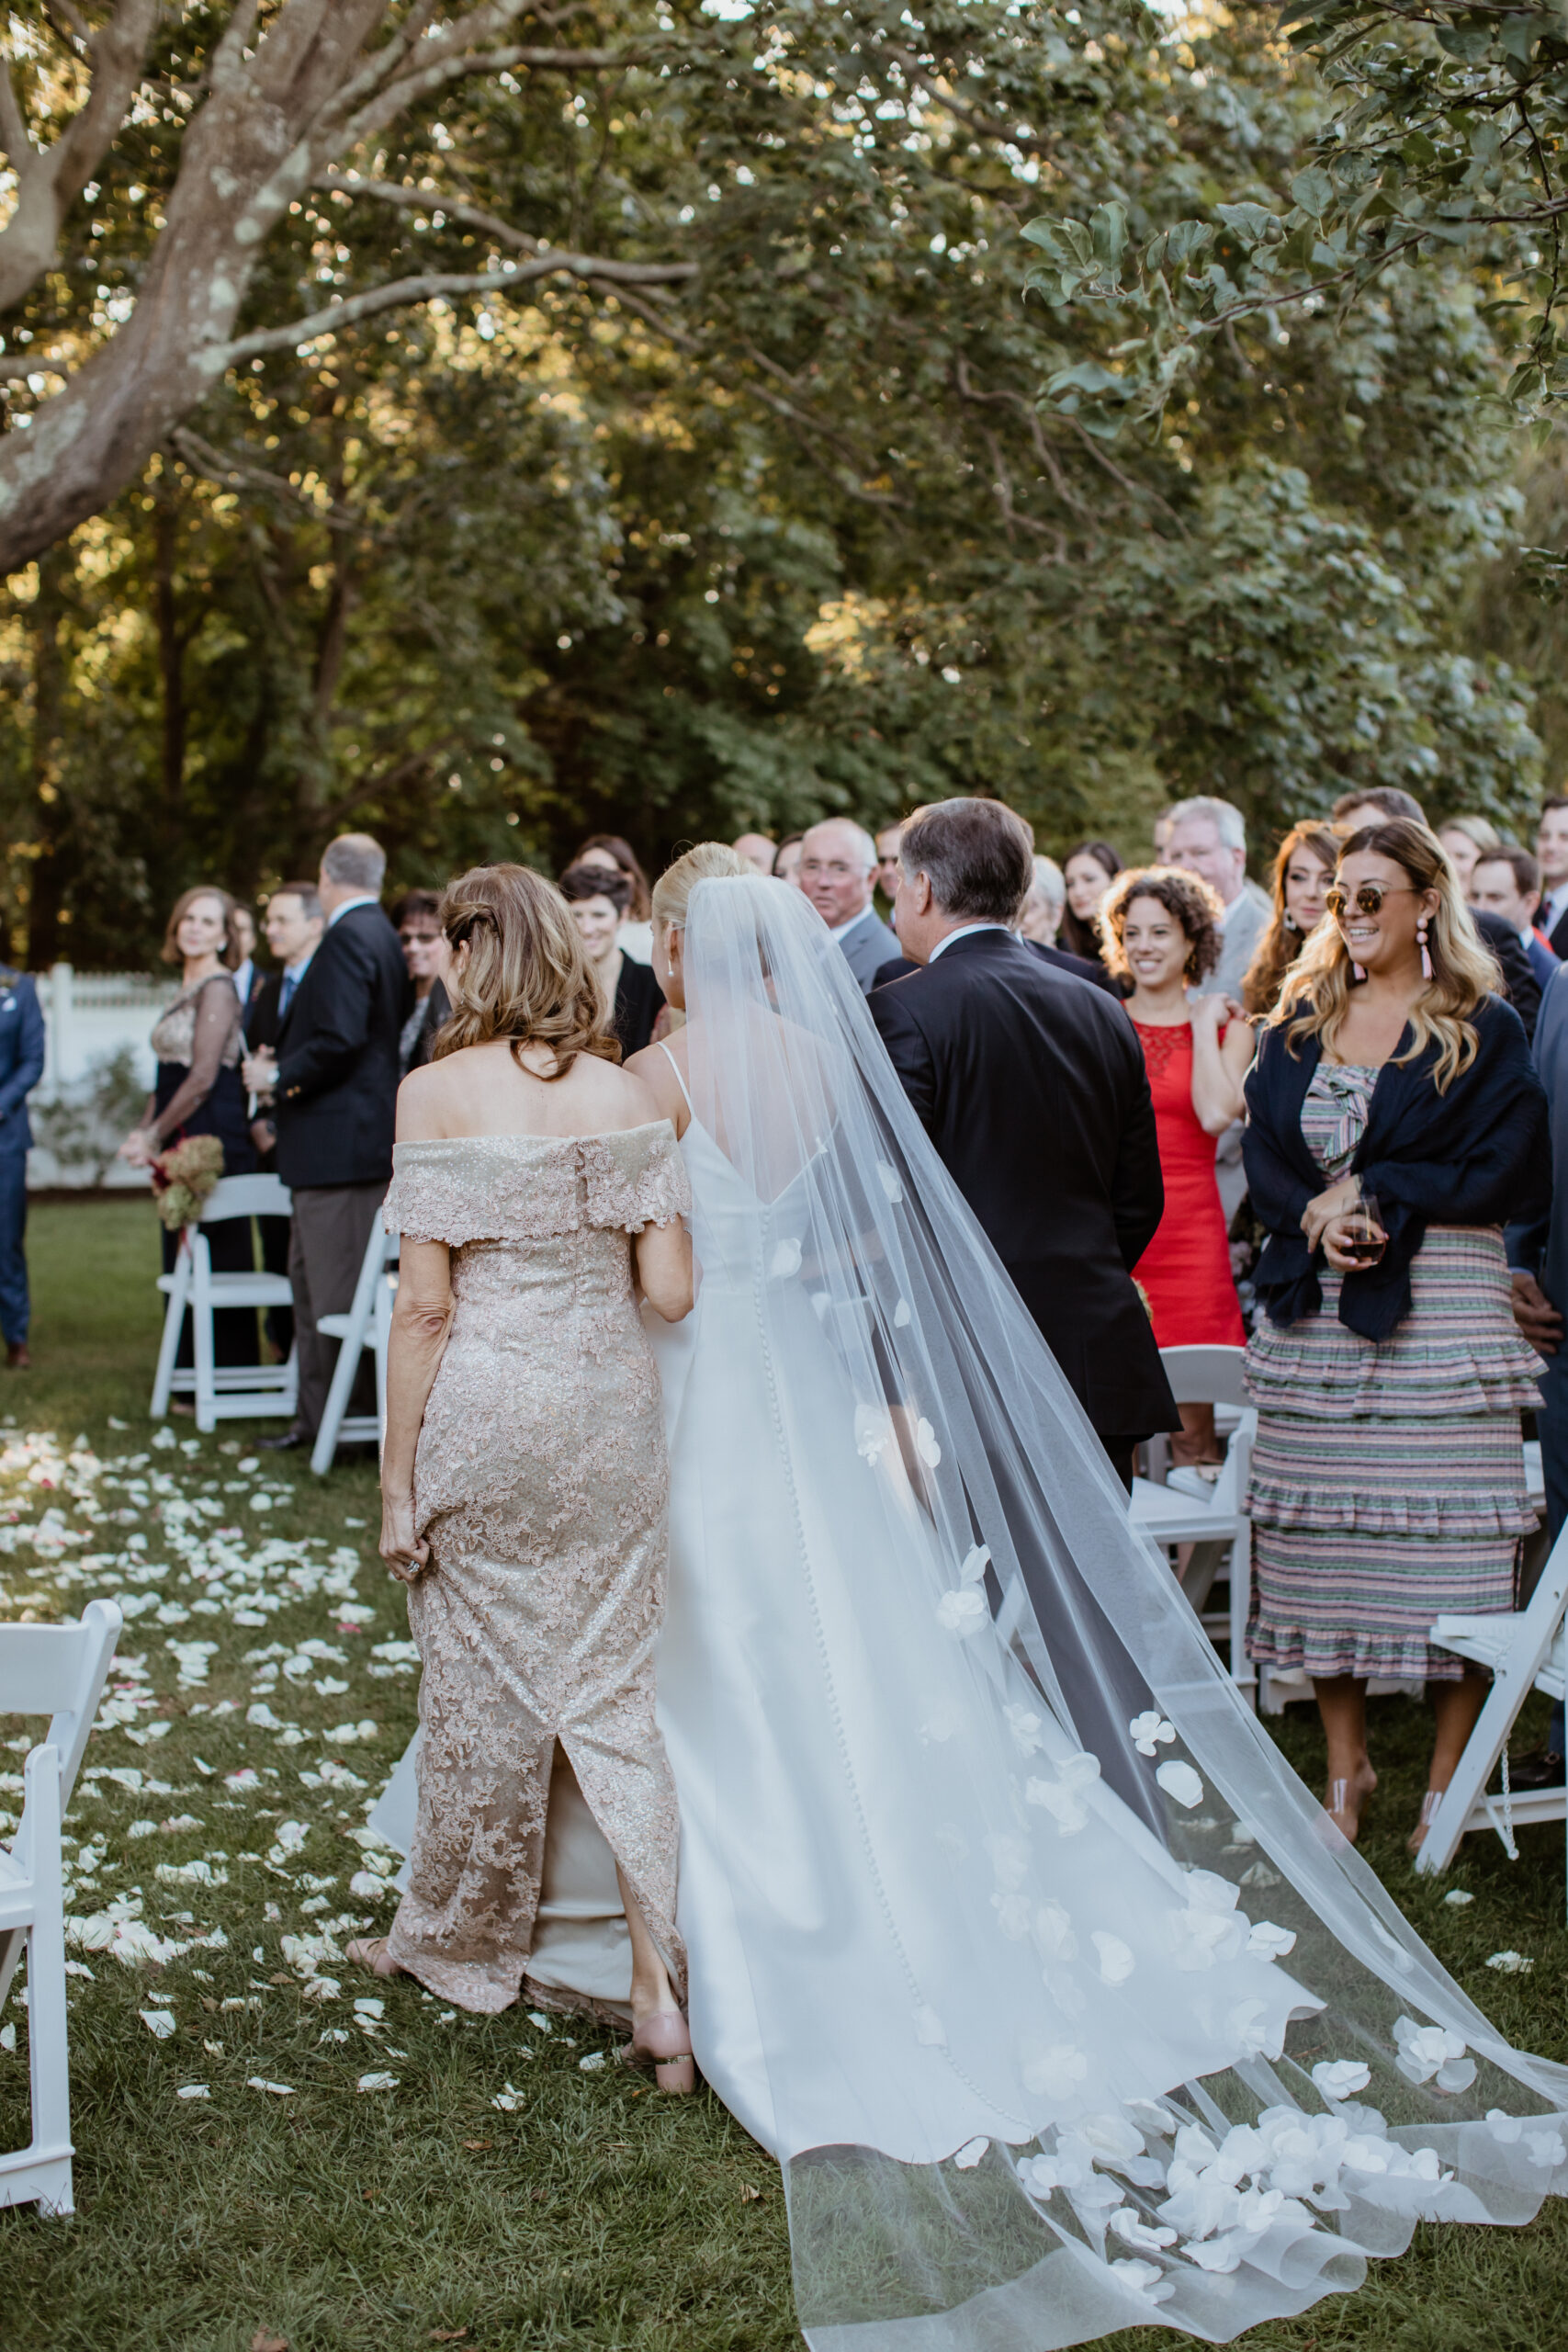 Stunning bride walks down the aisle with her mom and dad